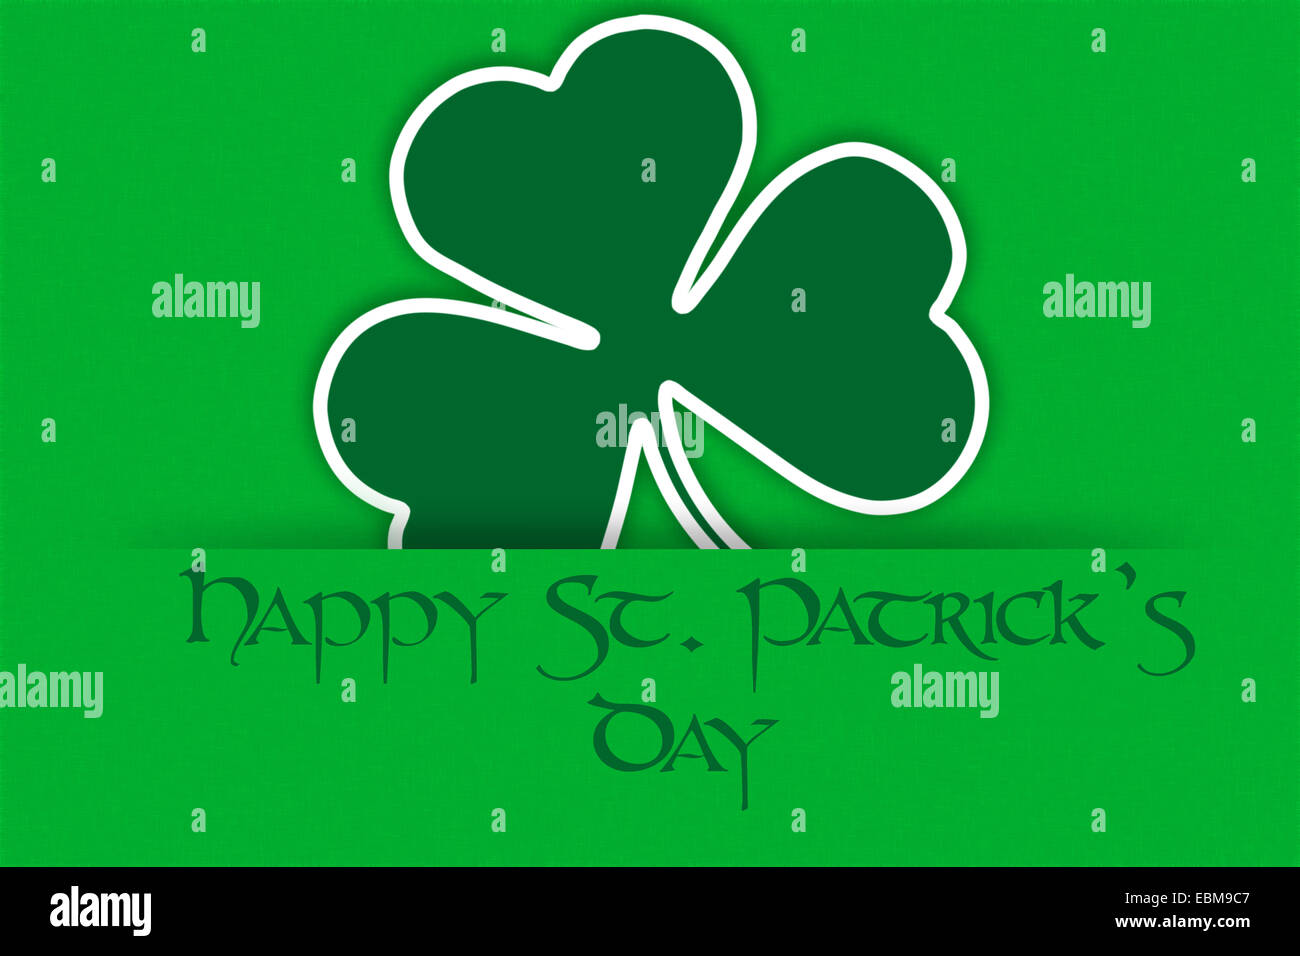 Irish holiday St. Patrick's Day green greeting backdrop with clover and text - Happy St. Patrick's Day Stock Photo